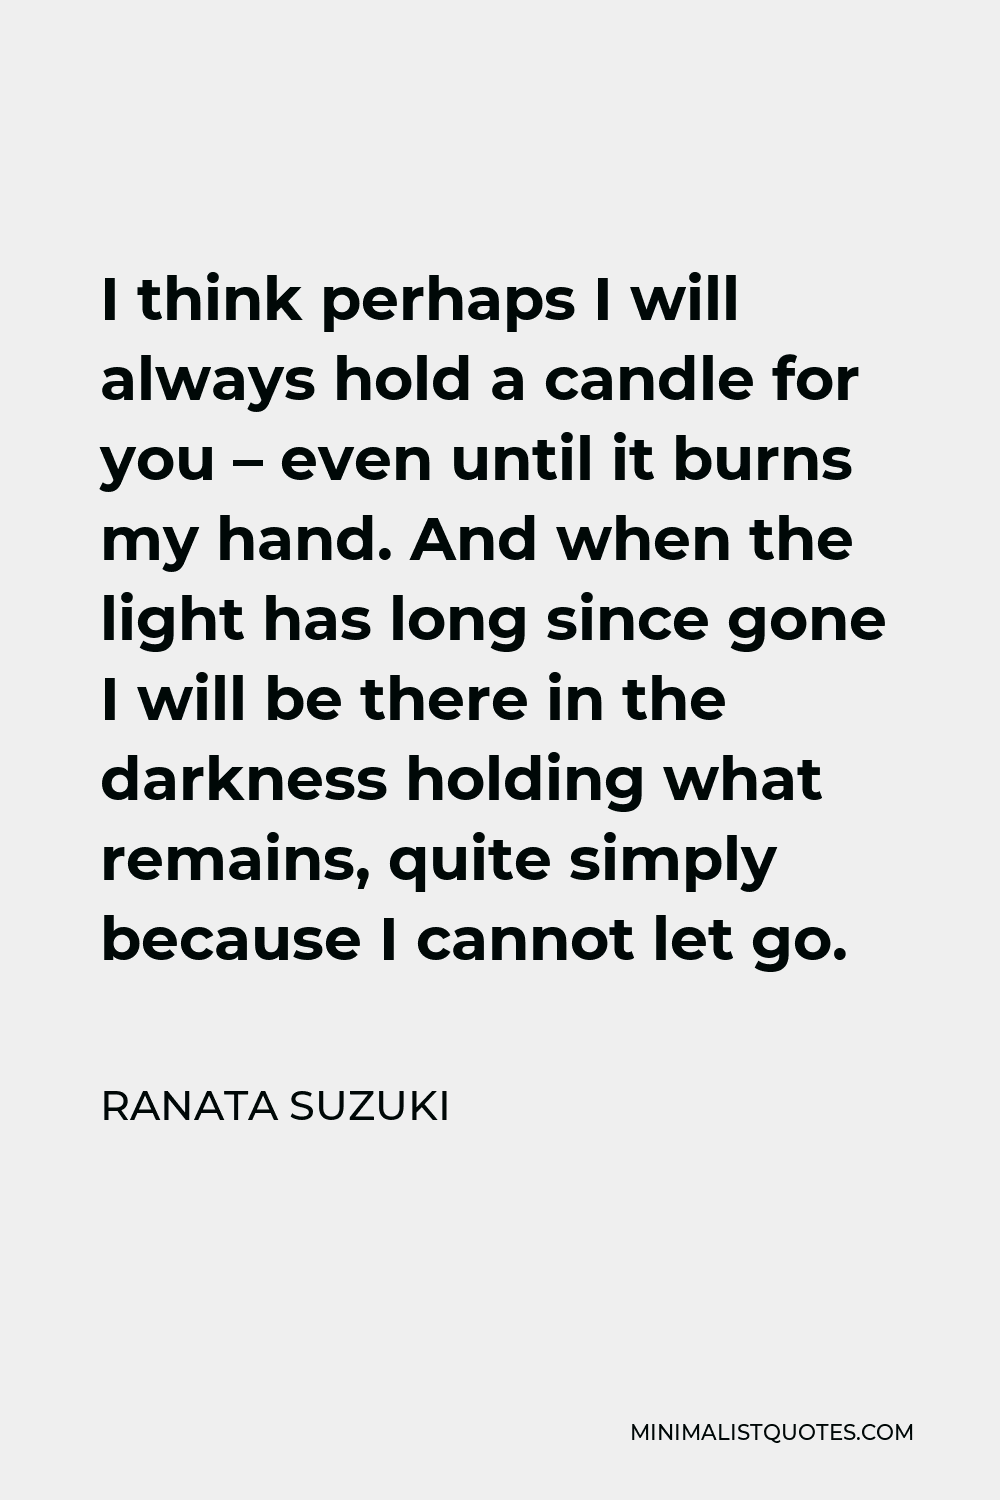 Ranata Suzuki Quote - I think perhaps I will always hold a candle for you – even until it burns my hand. And when the light has long since gone I will be there in the darkness holding what remains, quite simply because I cannot let go.